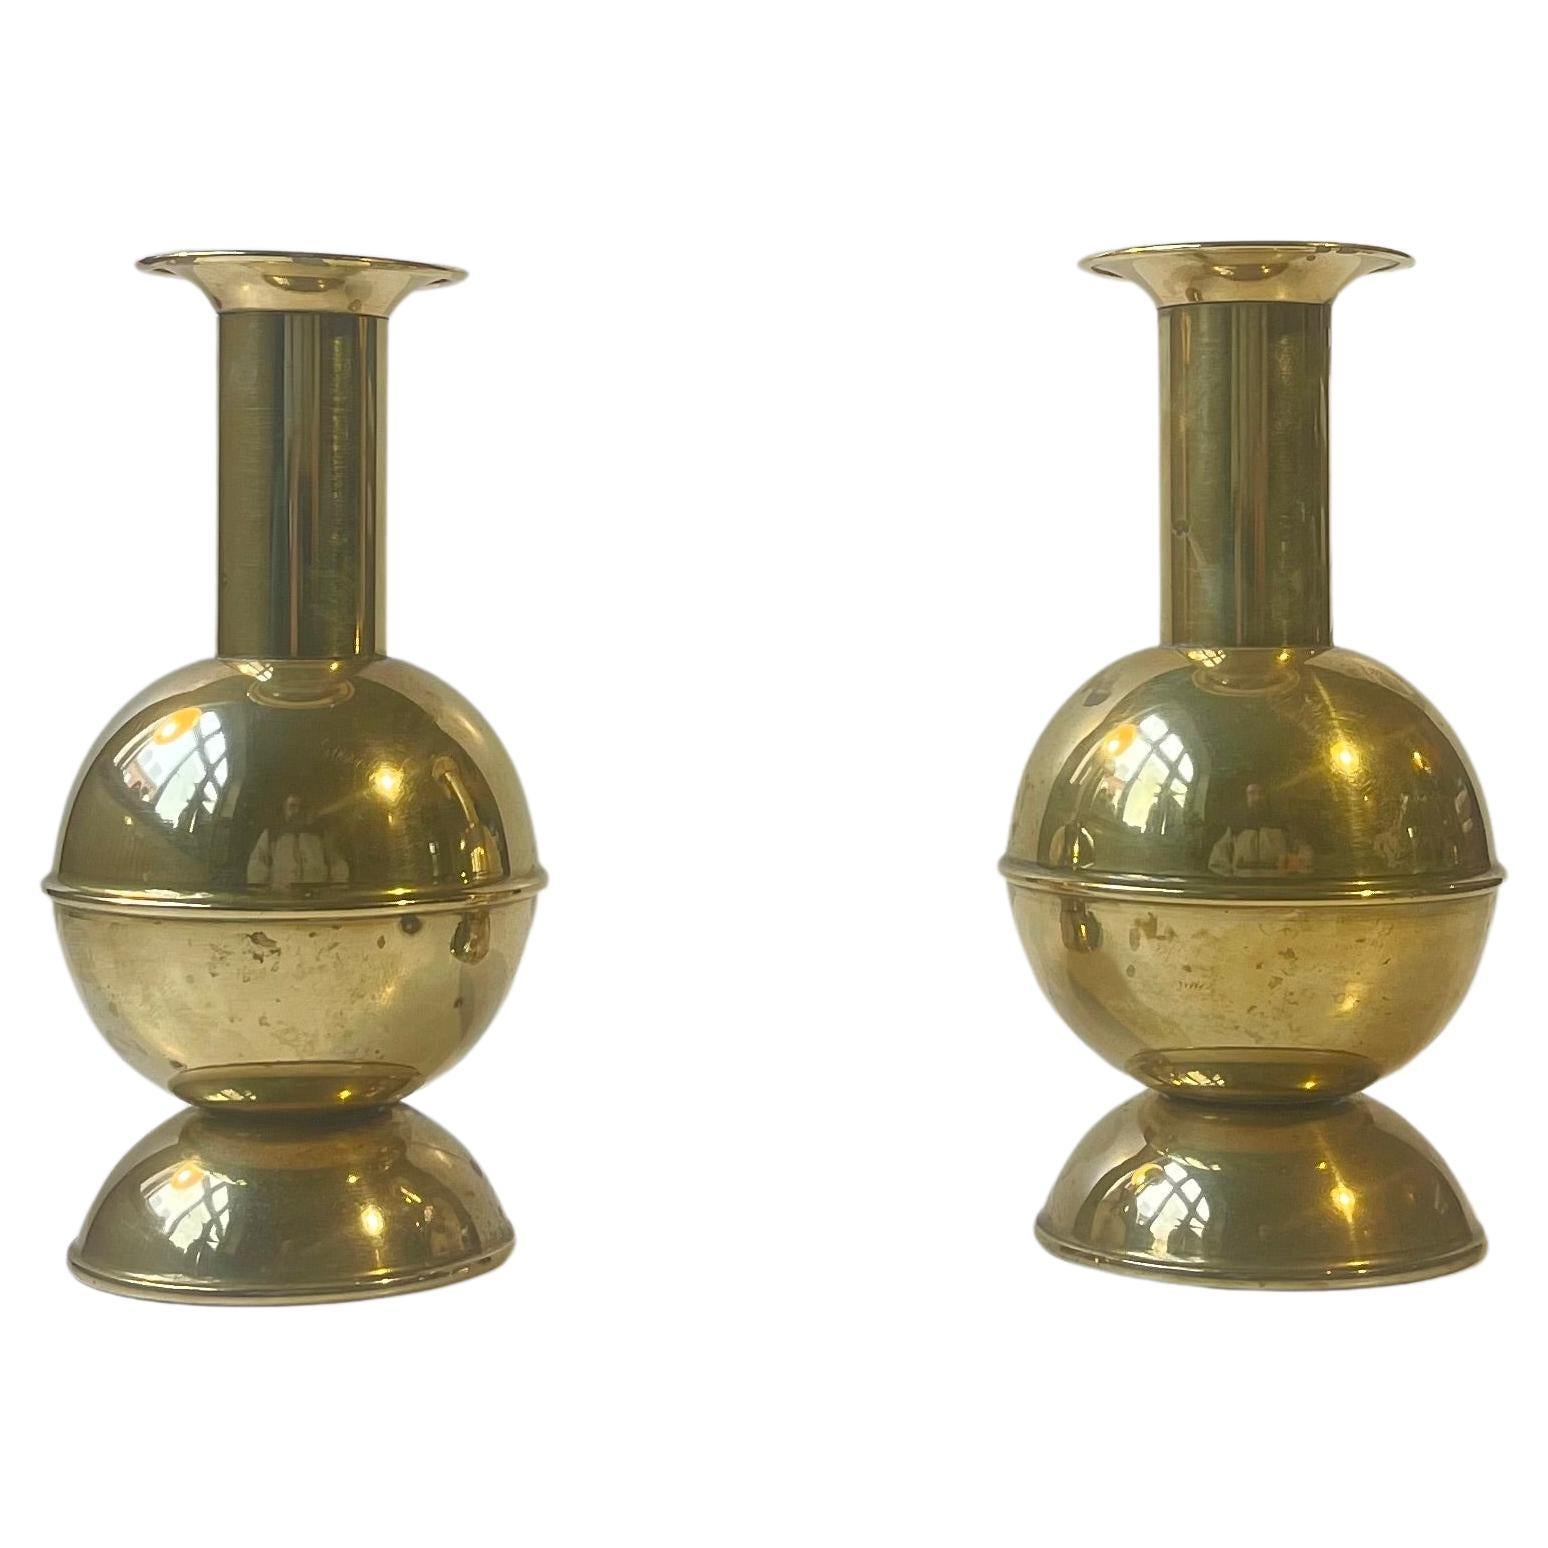 Architectural Scandinavian Candlesticks in Brass, 1970s For Sale